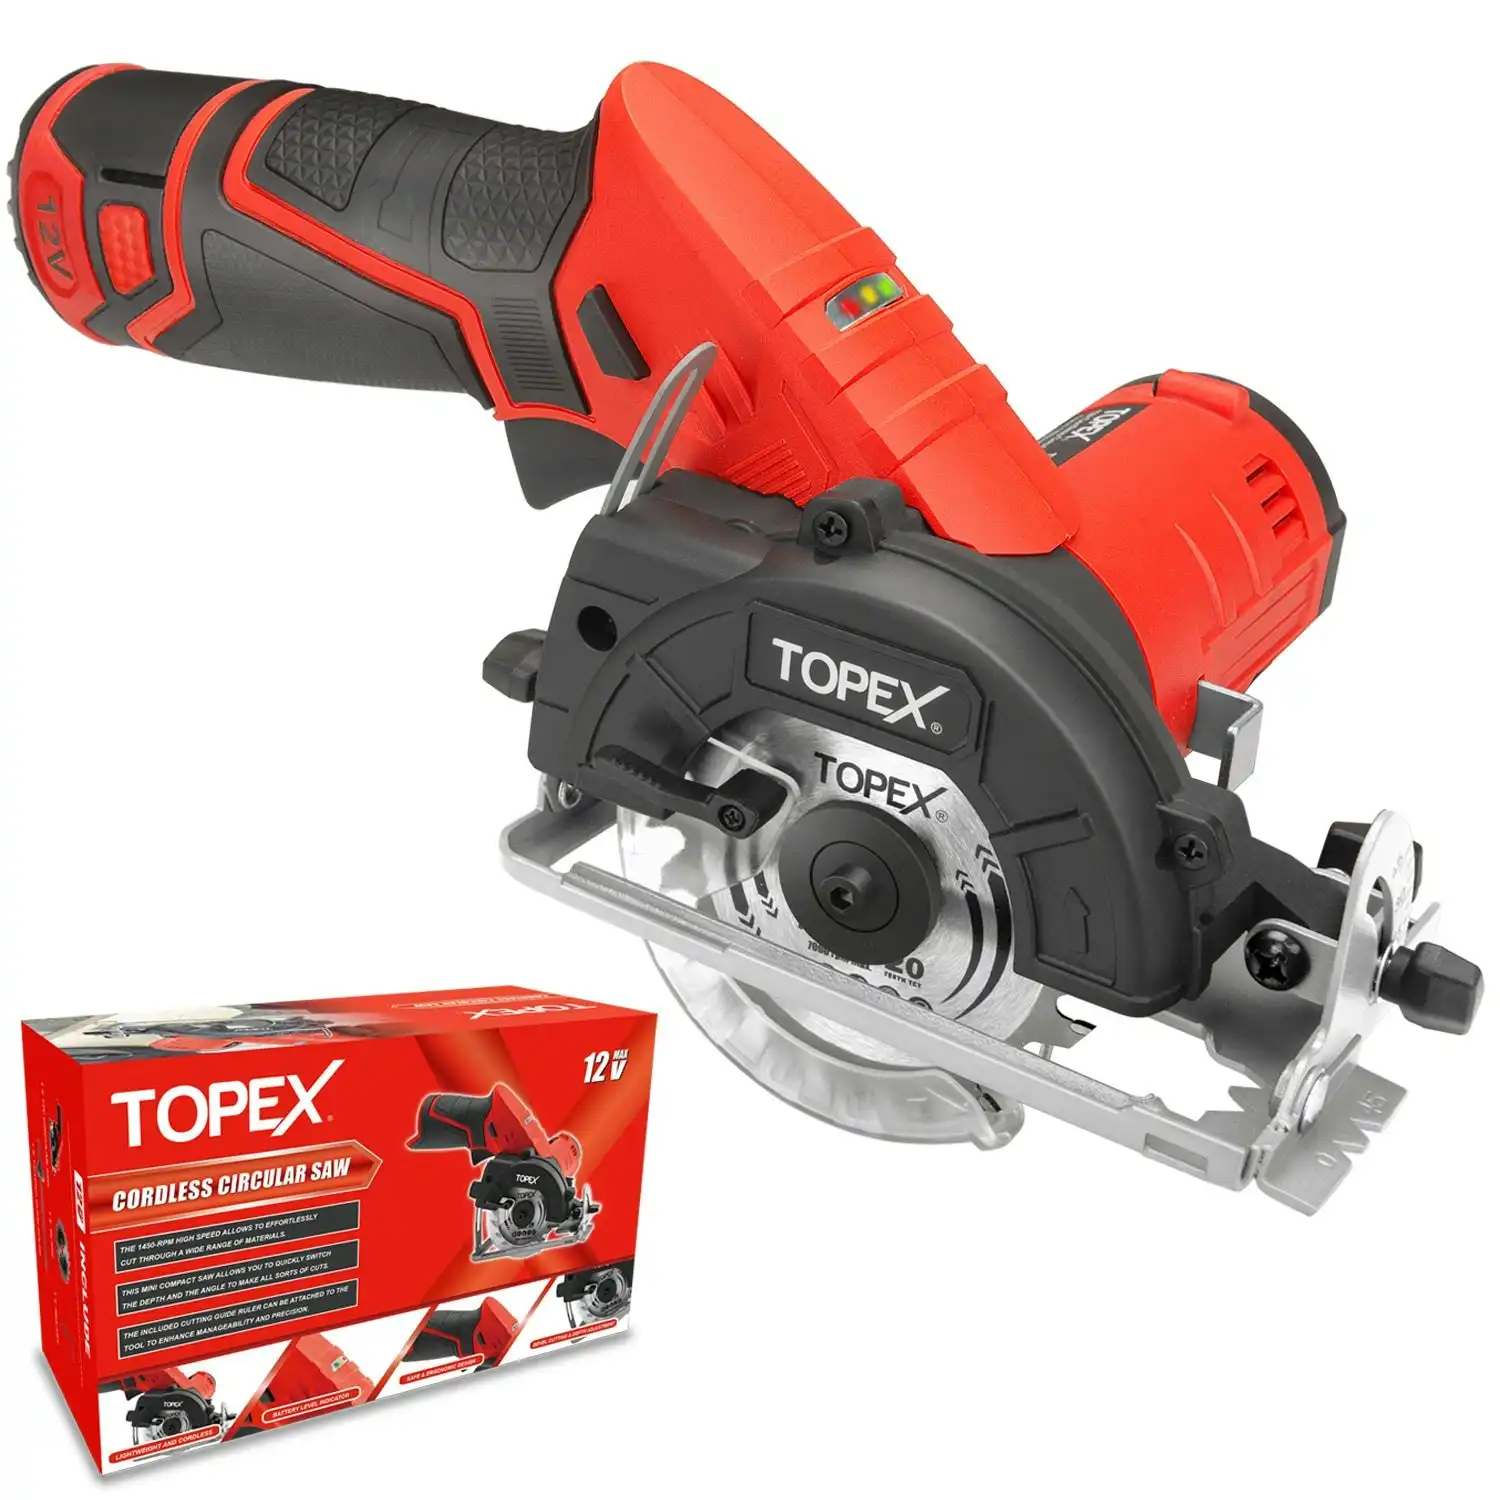 Topex 12V Max Cordless Circular Saw 85 mm Compact Lightweight w/ Battery & Charger